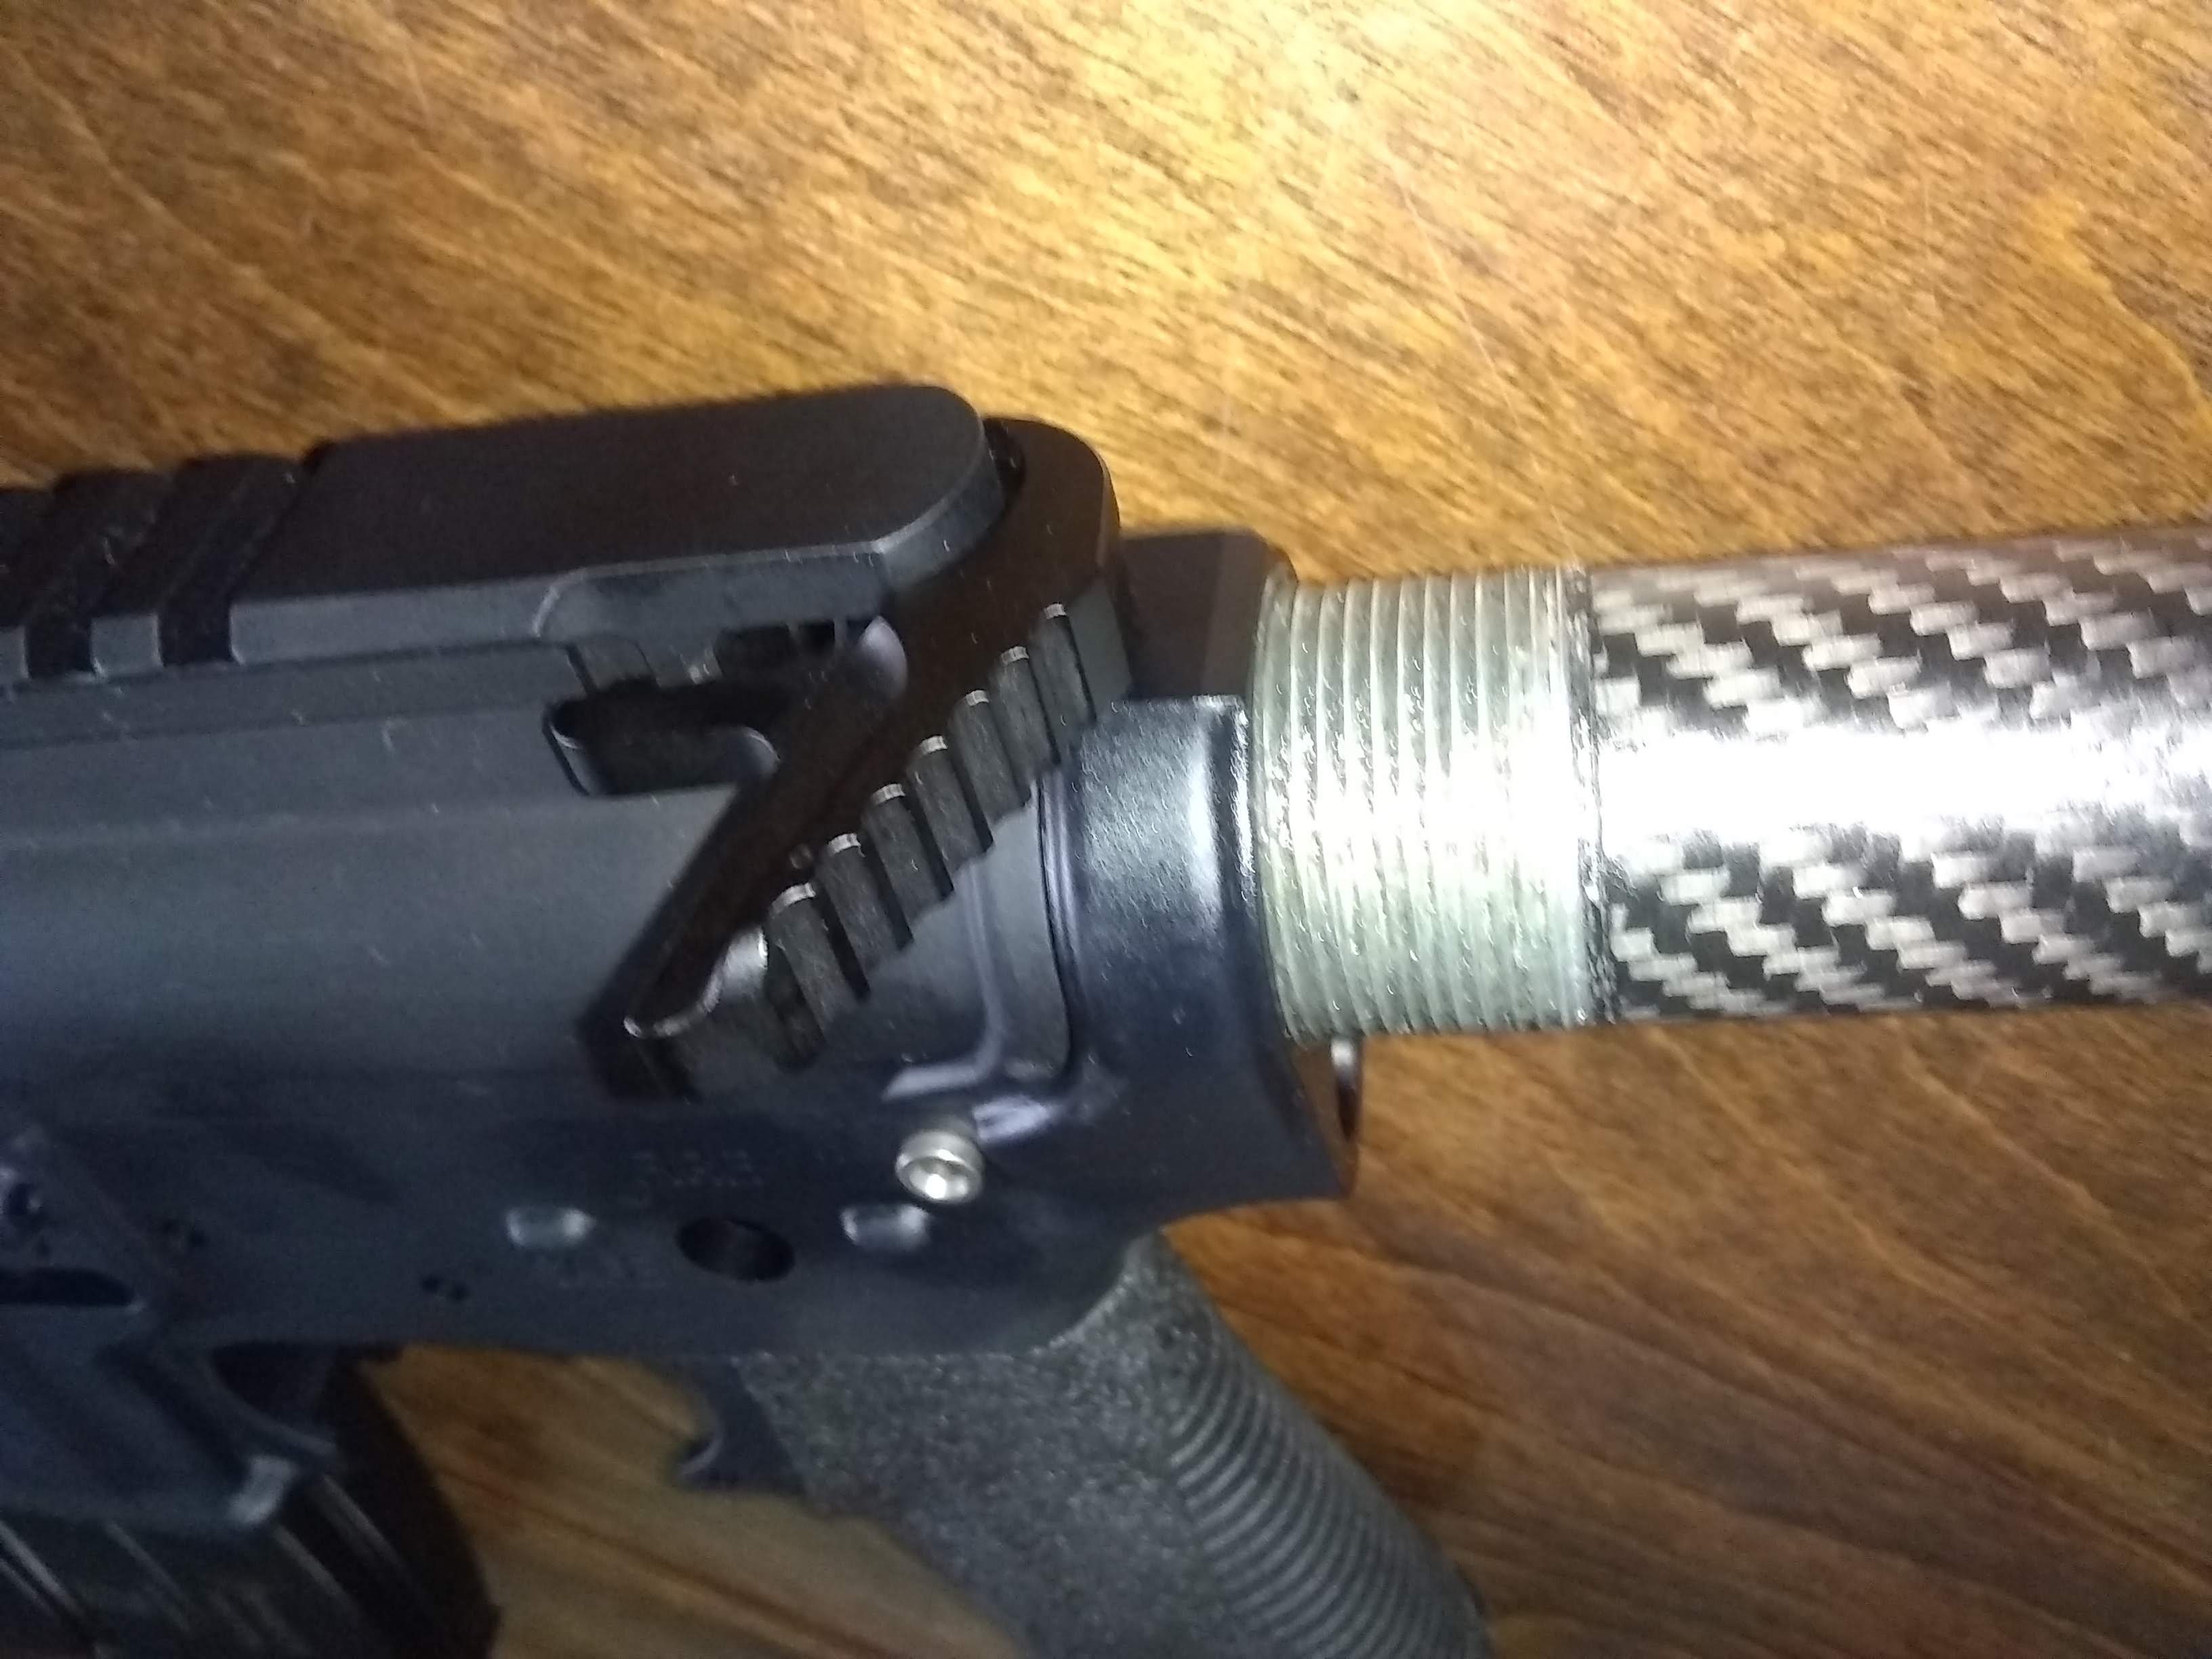 The Fortis Clutch charging handle weighs in at 1.06 oz. It's single-sided, but this is the only side that has a real function in mil-spec charging handles anyway. As pictured, the weight is now 3 lb, 12.1 oz.